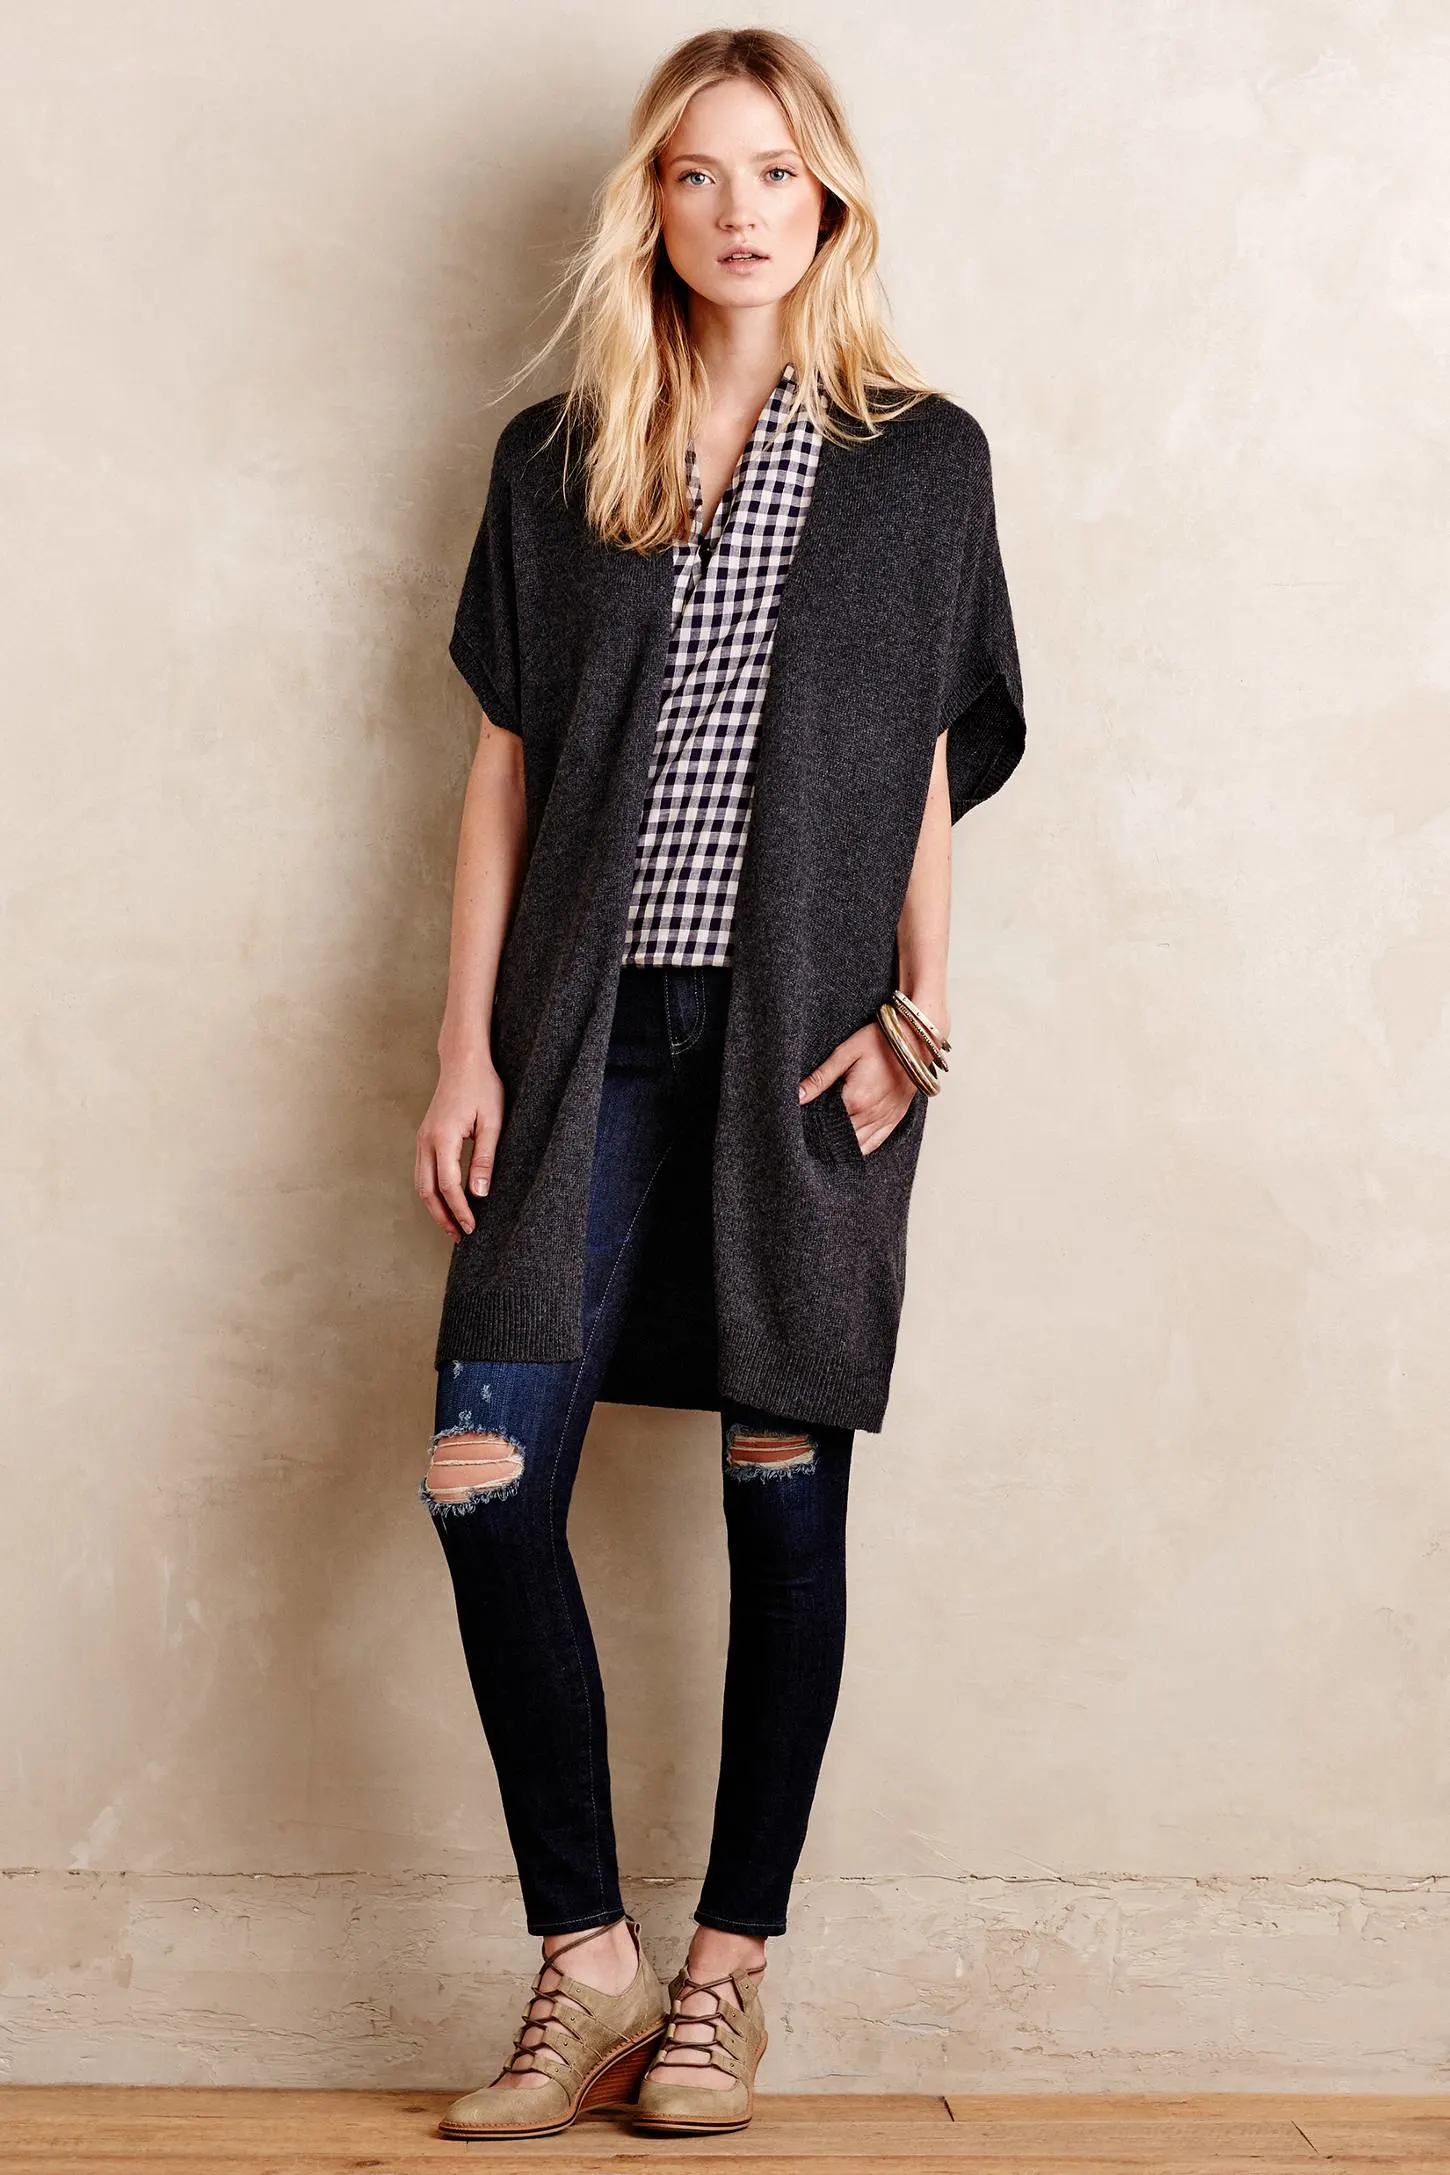 Wrap Cardi from Anthropologie